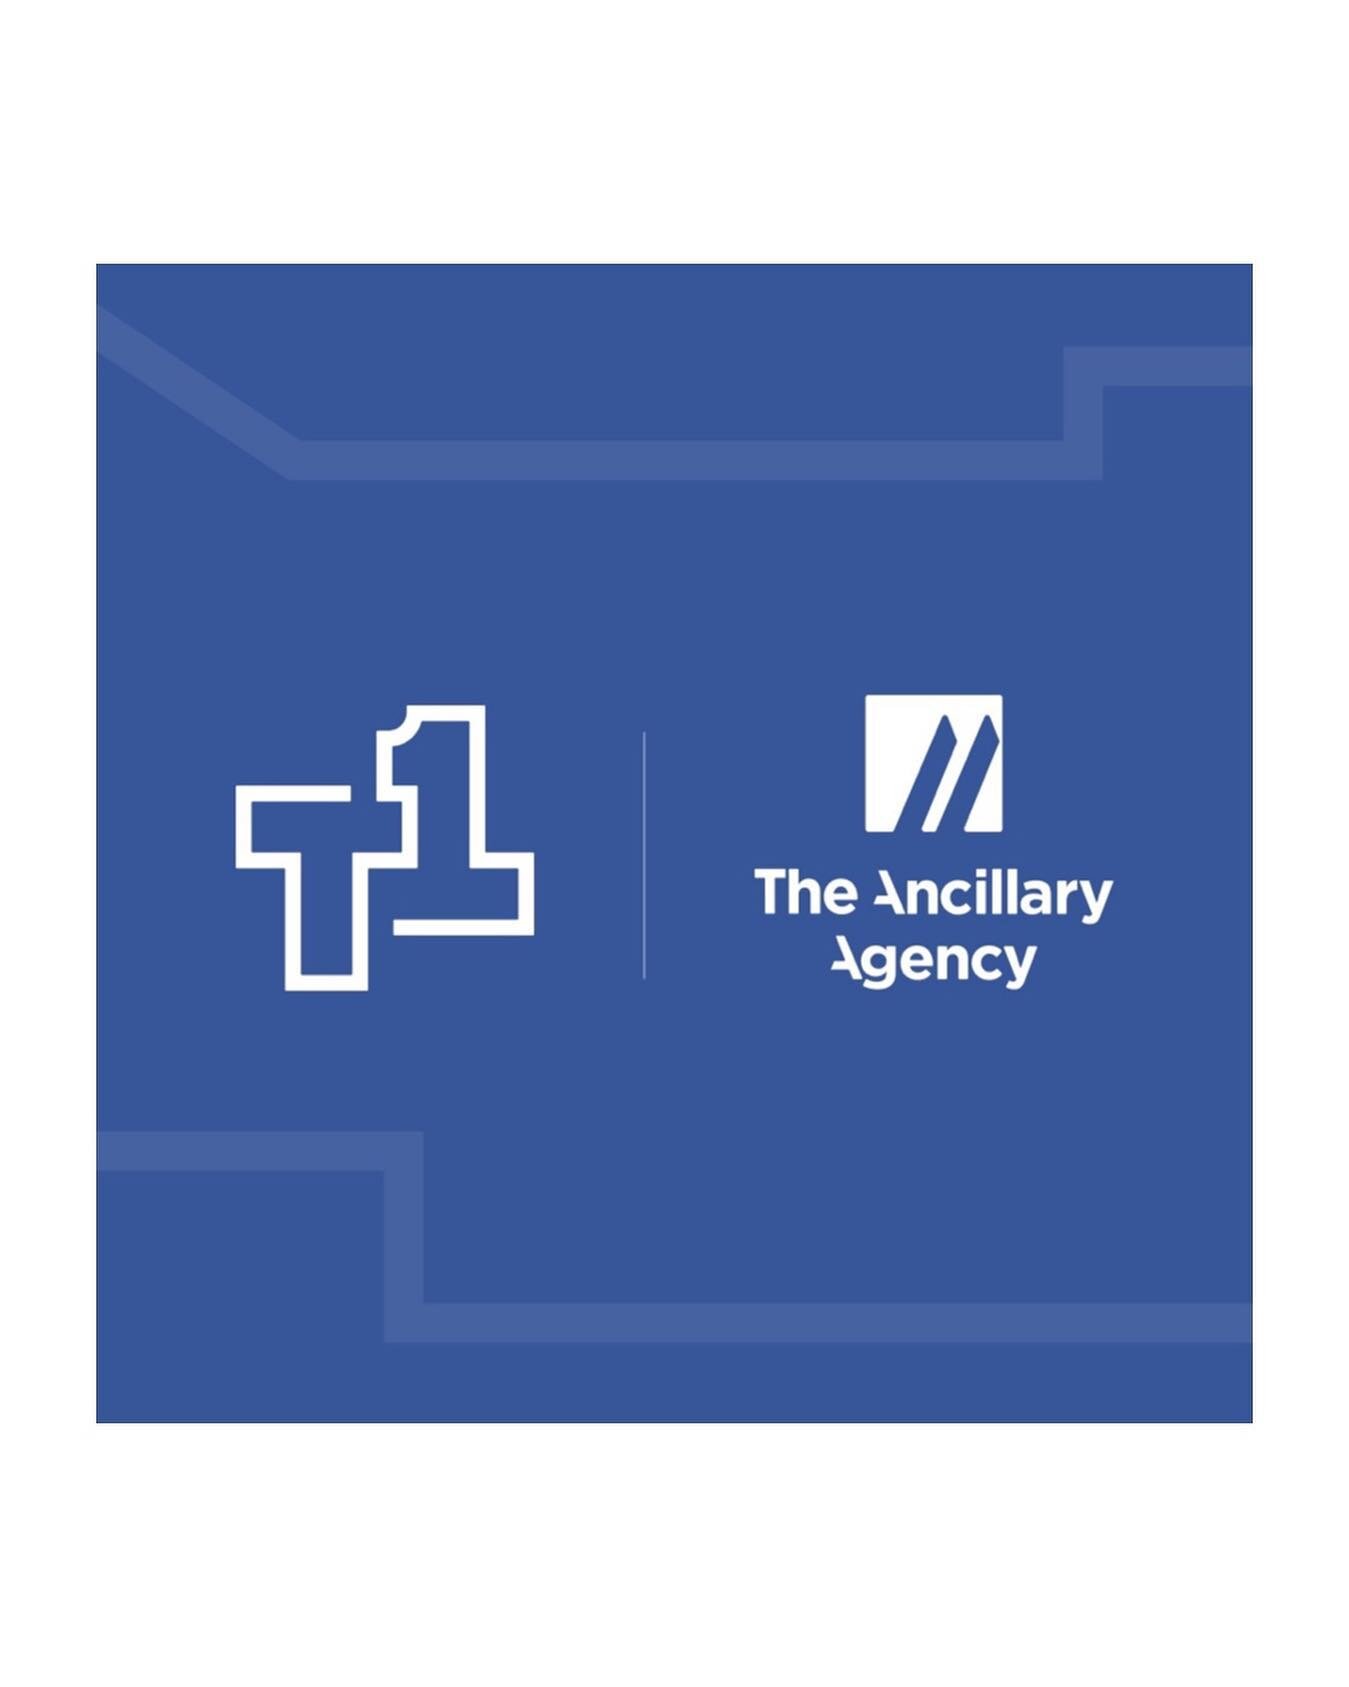 The Ancillary Agency is thrilled to announce that we have partnered with @t1agency, a full-stack sponsorship agency, to provide commercial real estate clients access to a full suite of sponsorship audit, measurement, and valuations offerings to deter